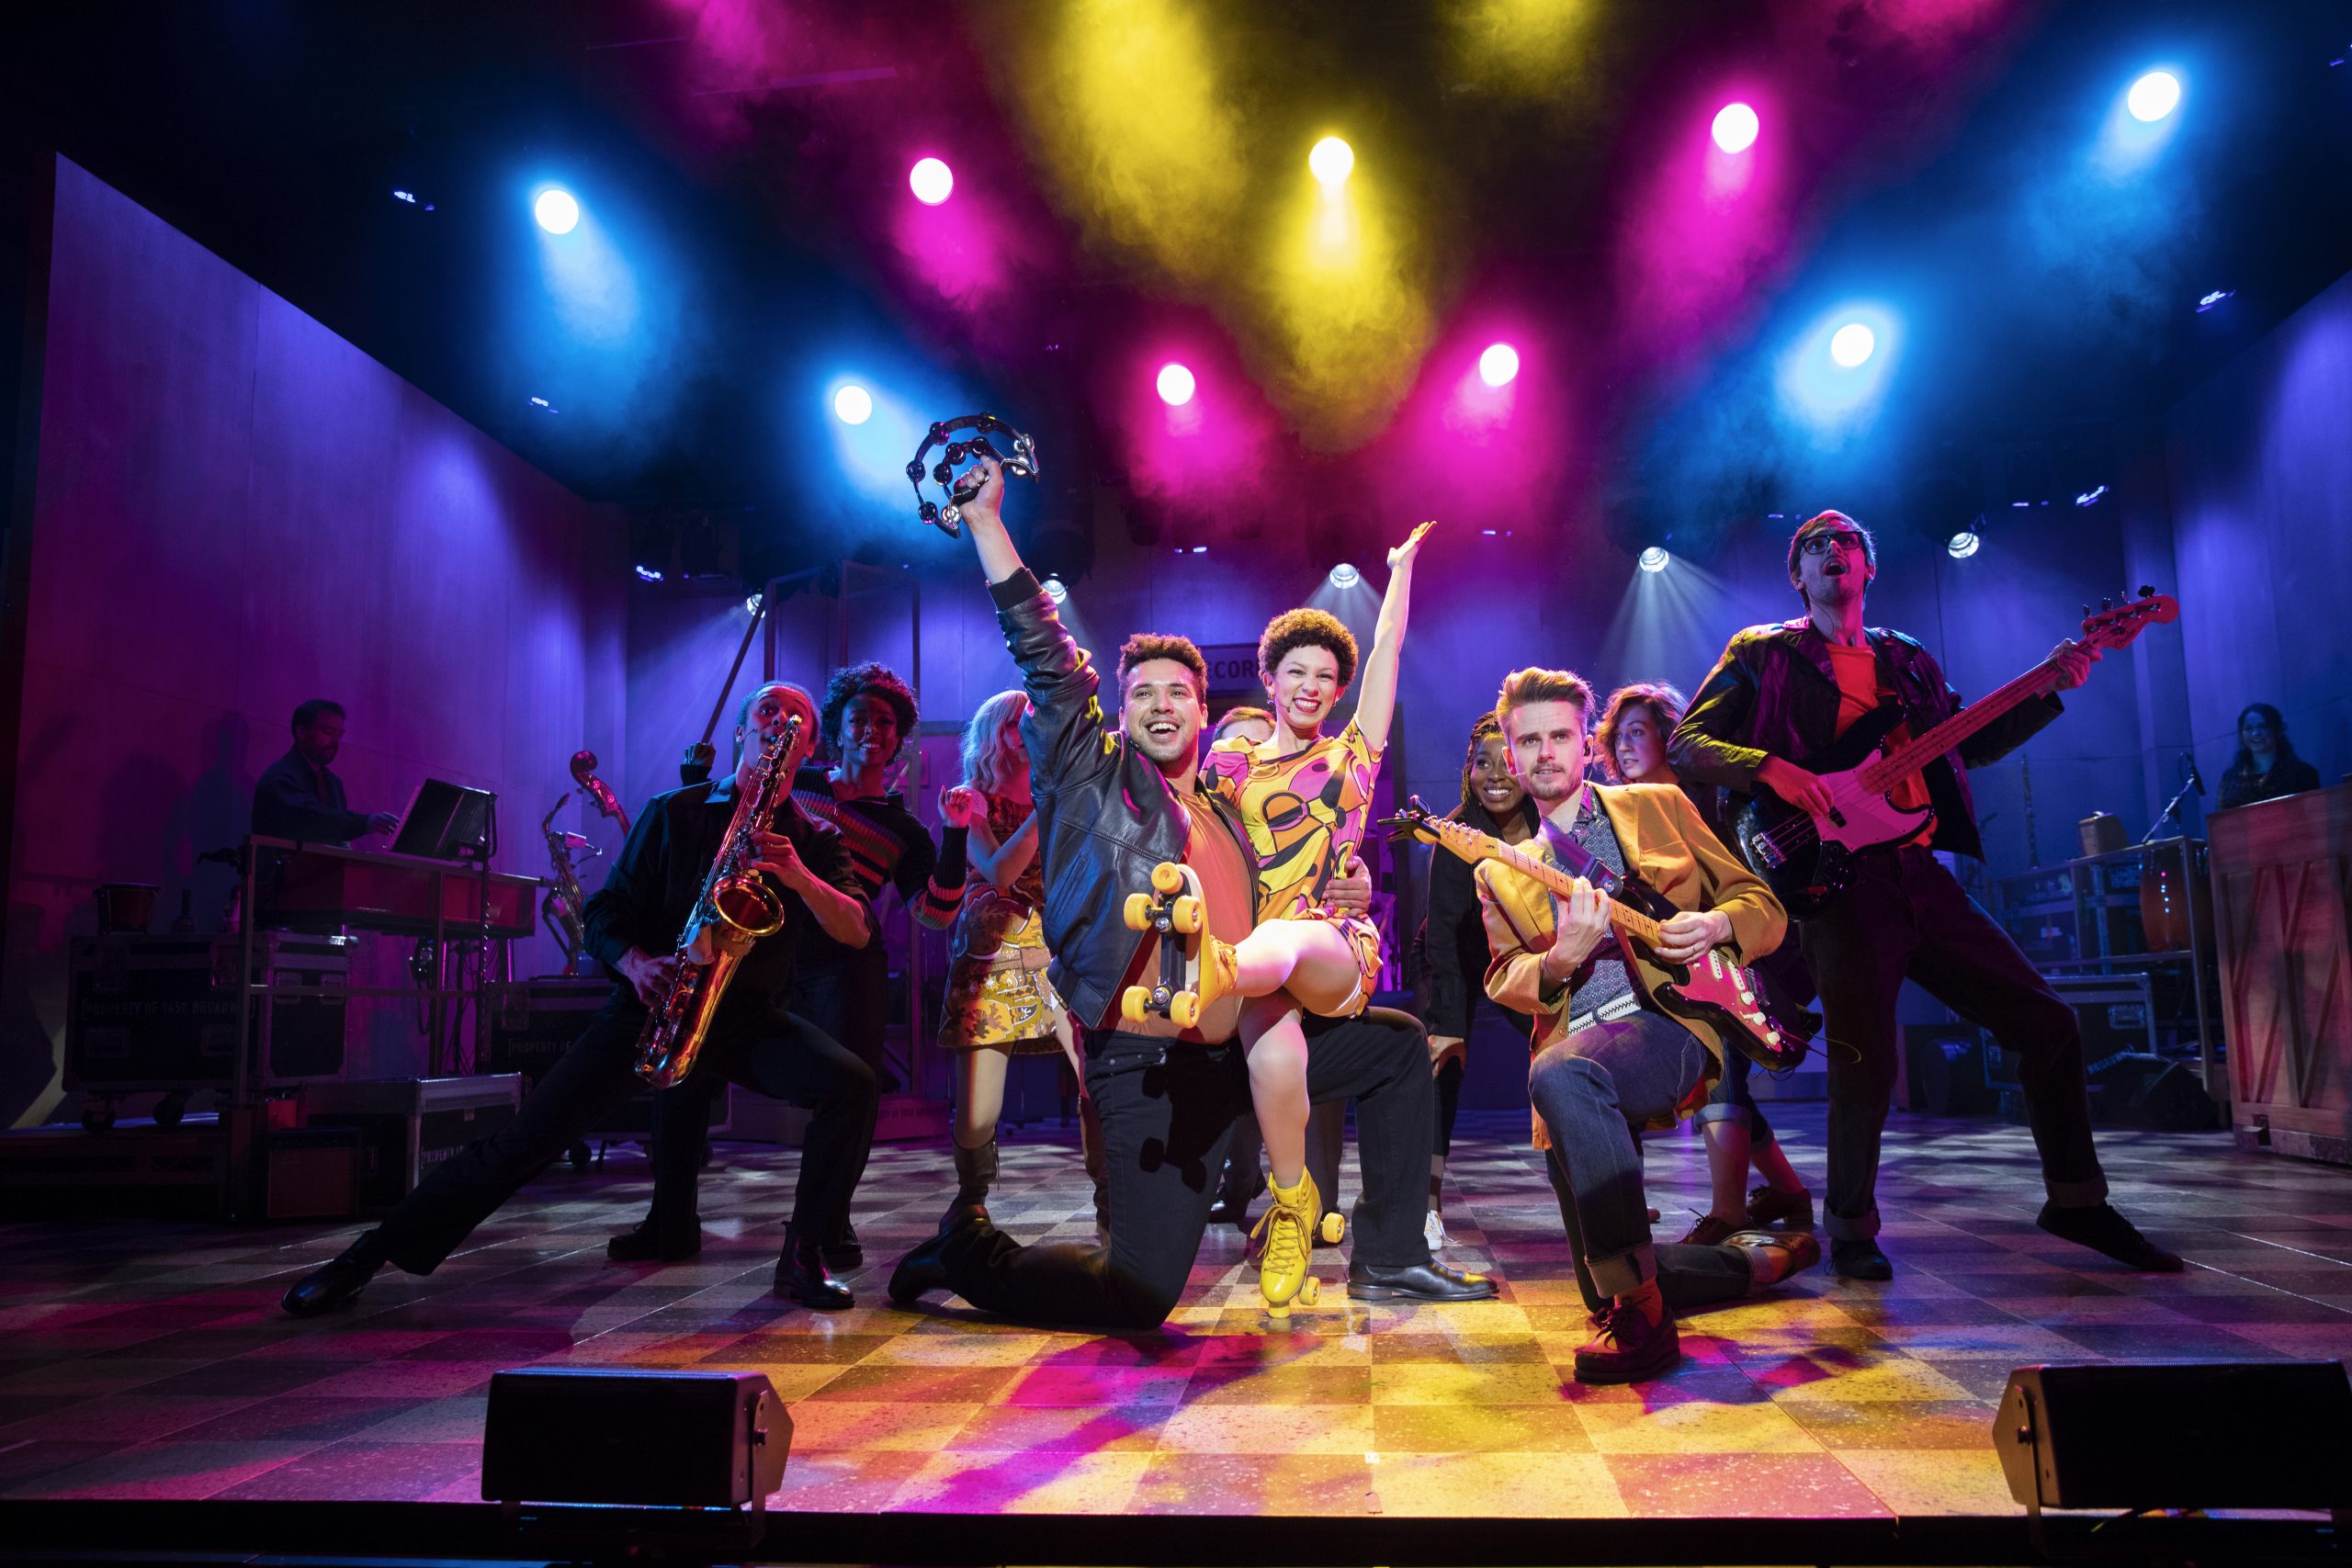 Production photograph from Beautiful - The Carole King Musical. Little Eva (Amena El-Kindy) smiles as she sits on the knee of a musician (Kevin Yates). The pair are smiling with an arm aloft, surrounded by other musicians and studio workers including Gerry Goffin (Tom Milner). Eva is wearing a 70s patterned dress and yellow roller skates, with cropped black hair, beneath candy-coloured lights in yellow, pink and blue.